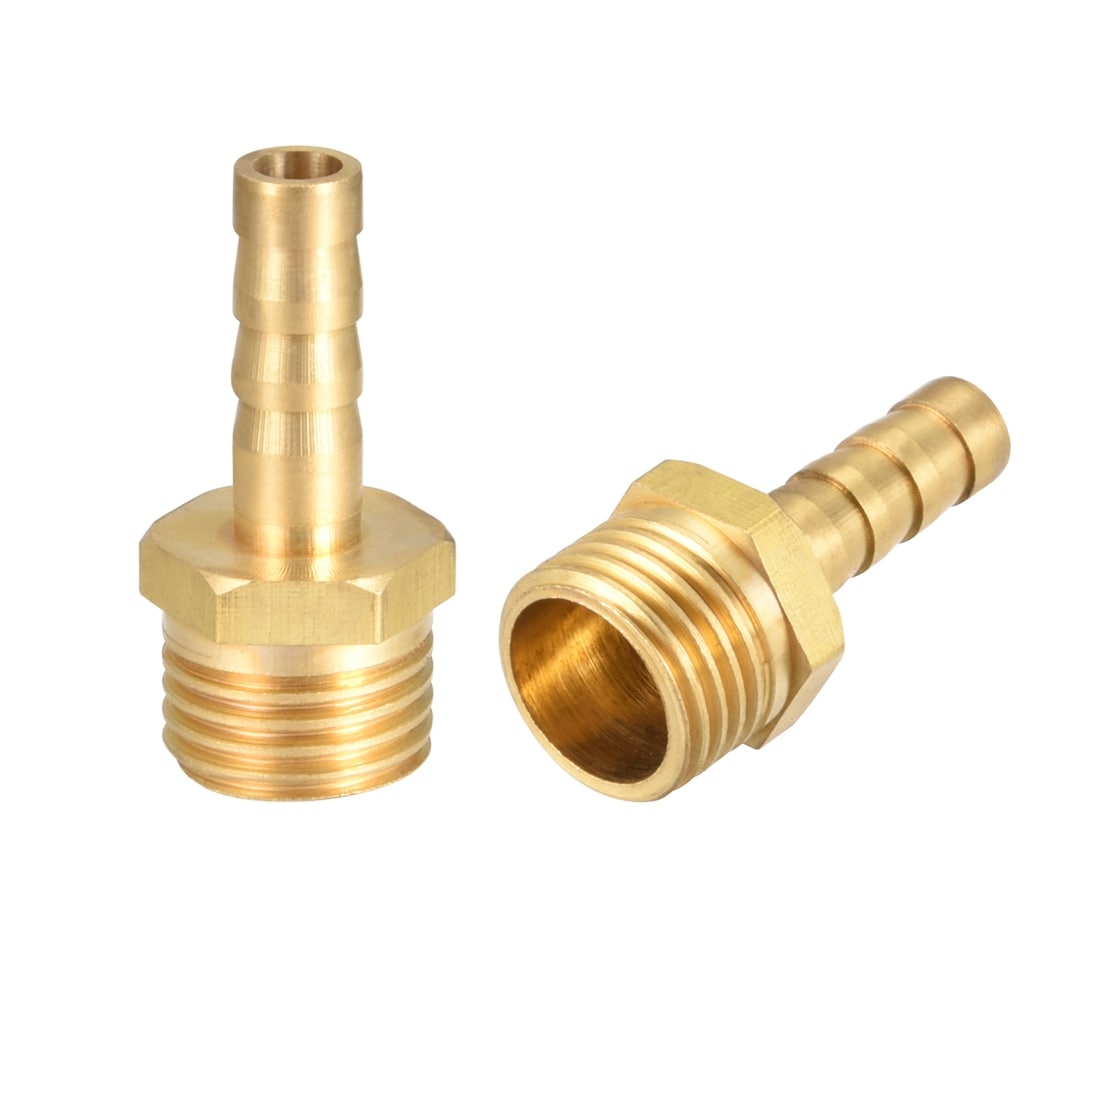 12mm Hose Barb 1/2BSP Female Thread Quick Joint Connector Adapter Gold P6A4 1X 